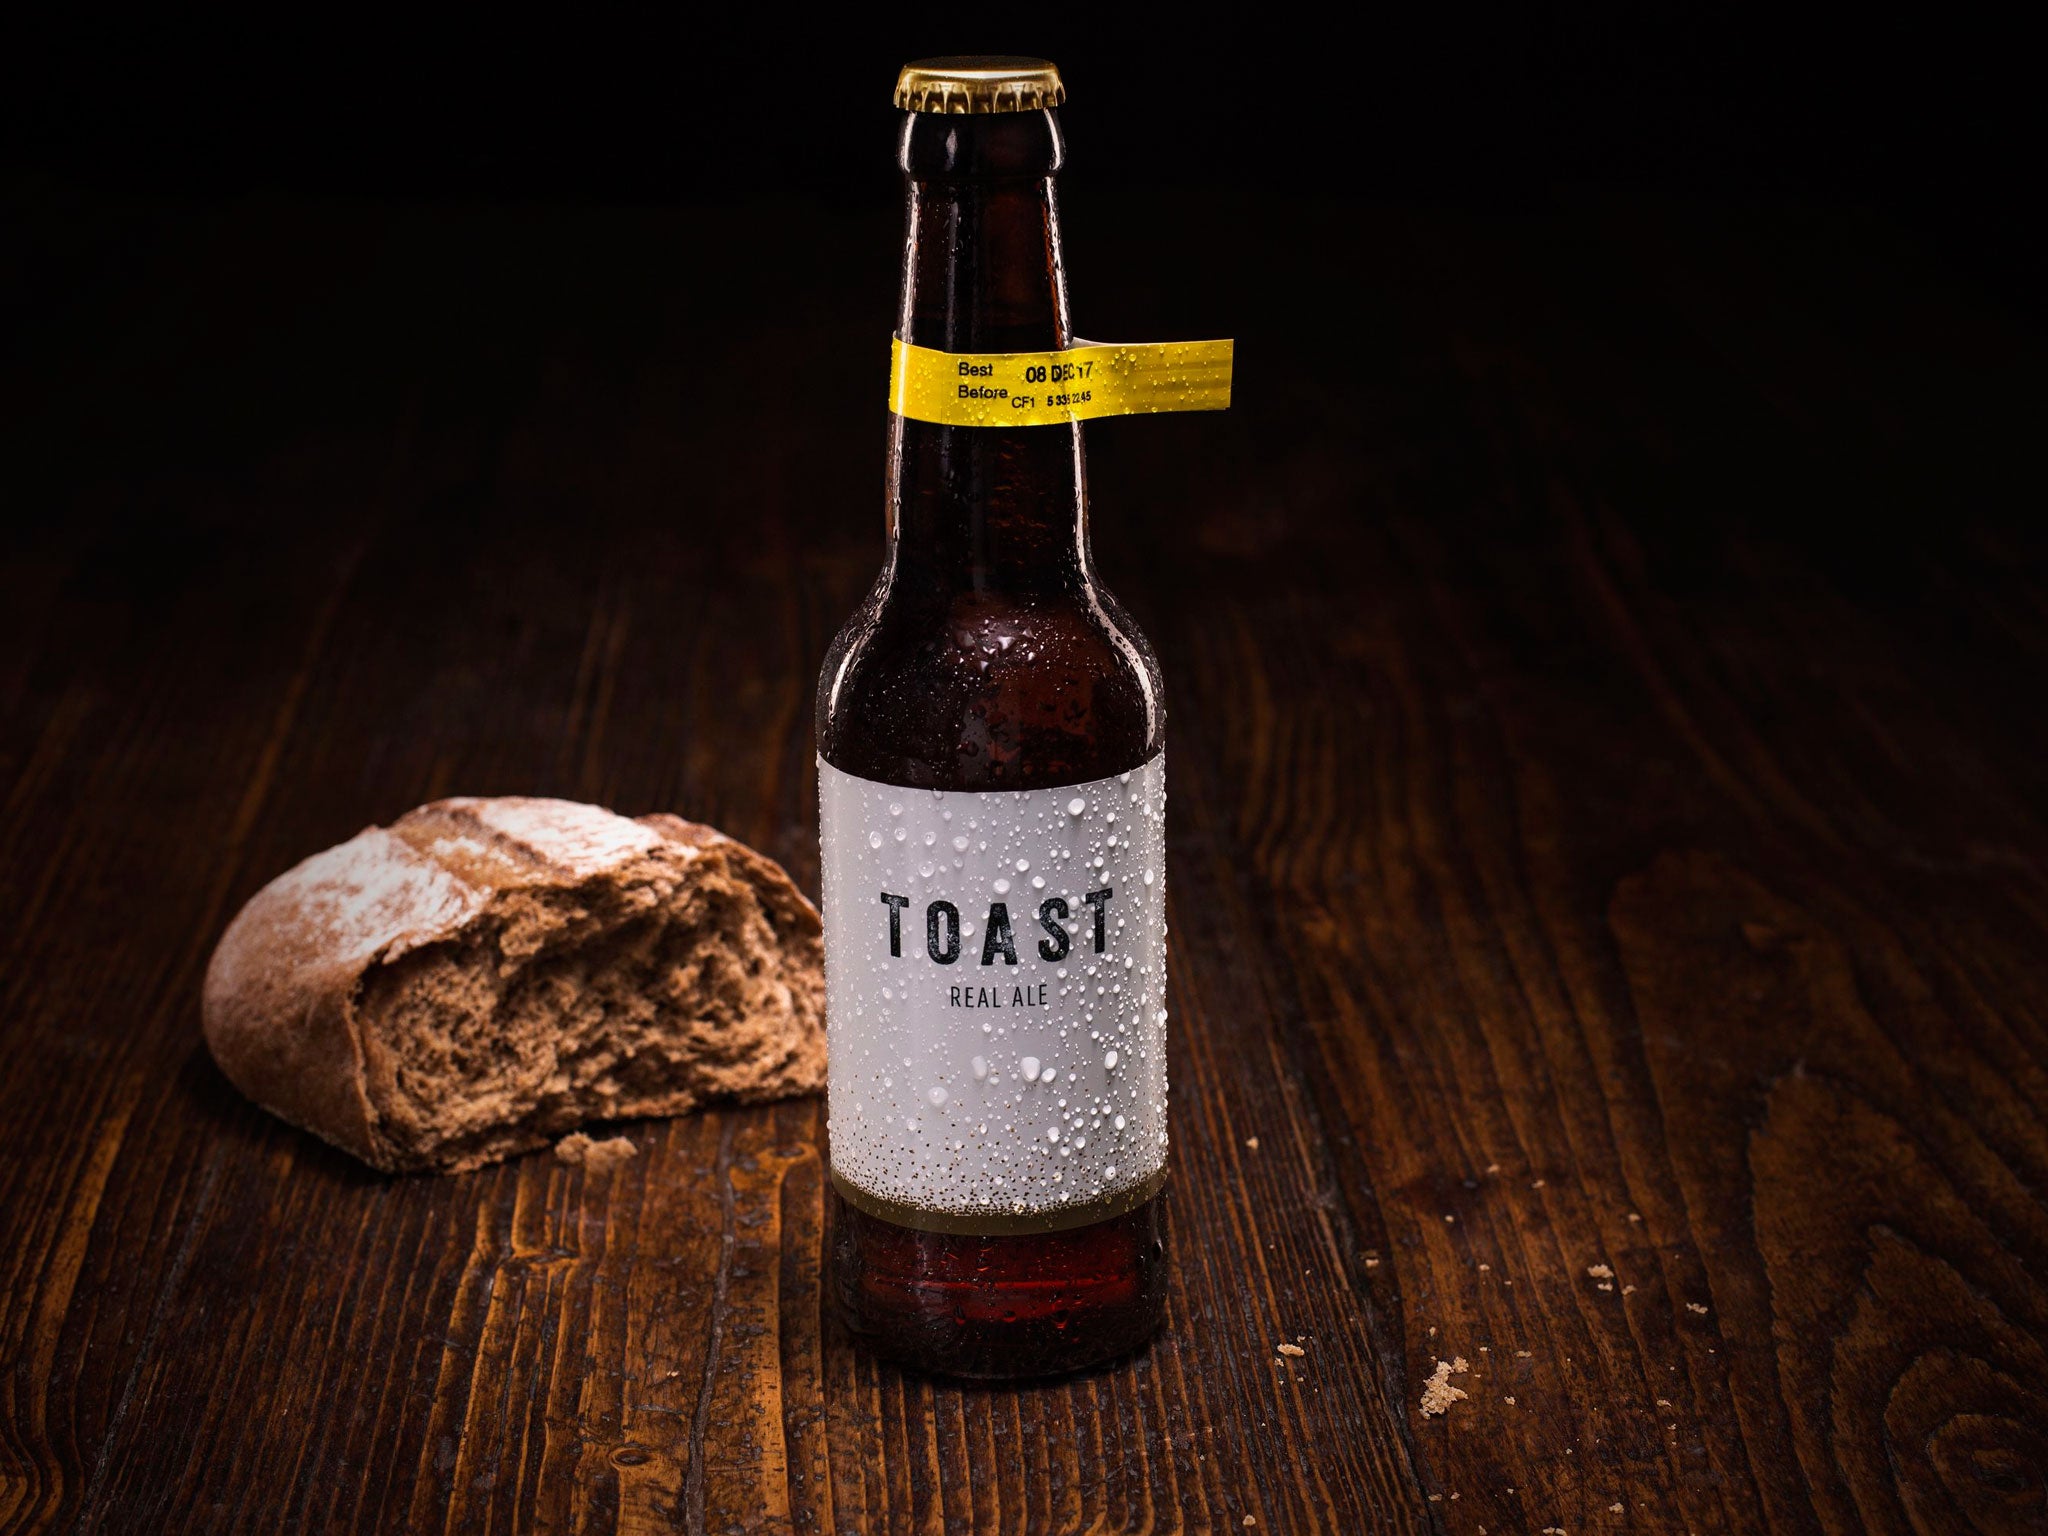 The beer, which will be available online at £3 per bottle, is being produced by Hackney Brewery